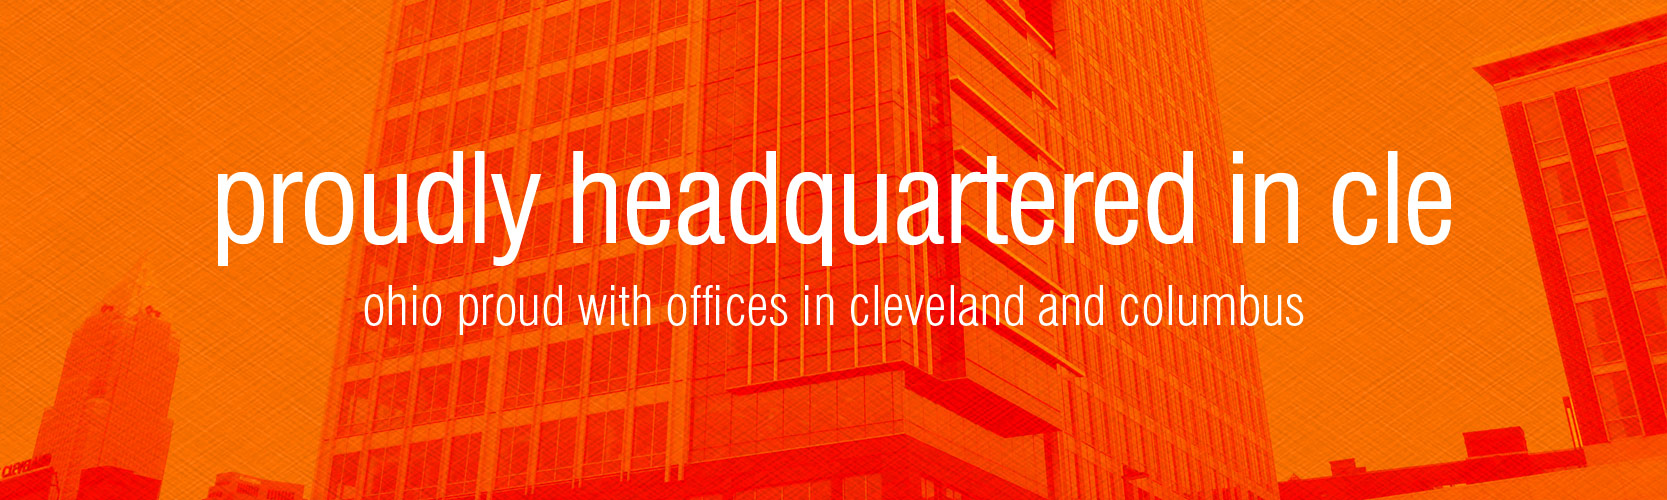 proudly headquartered in CLE - ohio proud with offices in cleveland and columbus